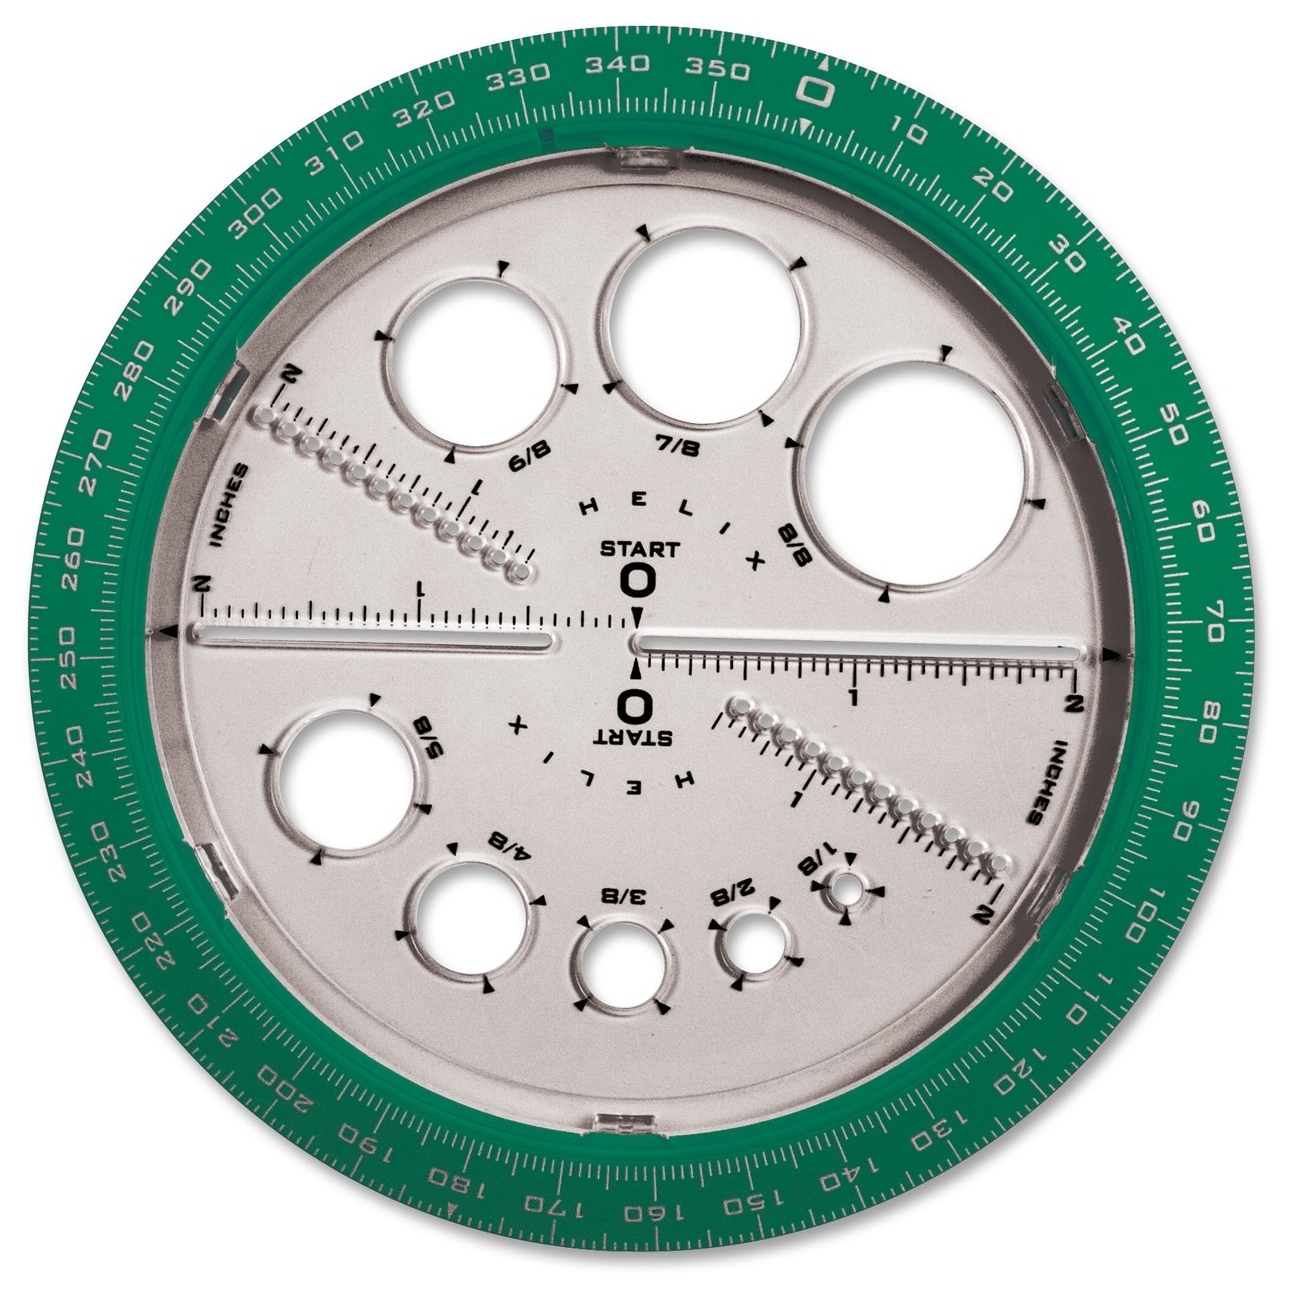 Helix 36002 Angle/Circle Maker, Protractor/Compass, 360 Degrees by Helix